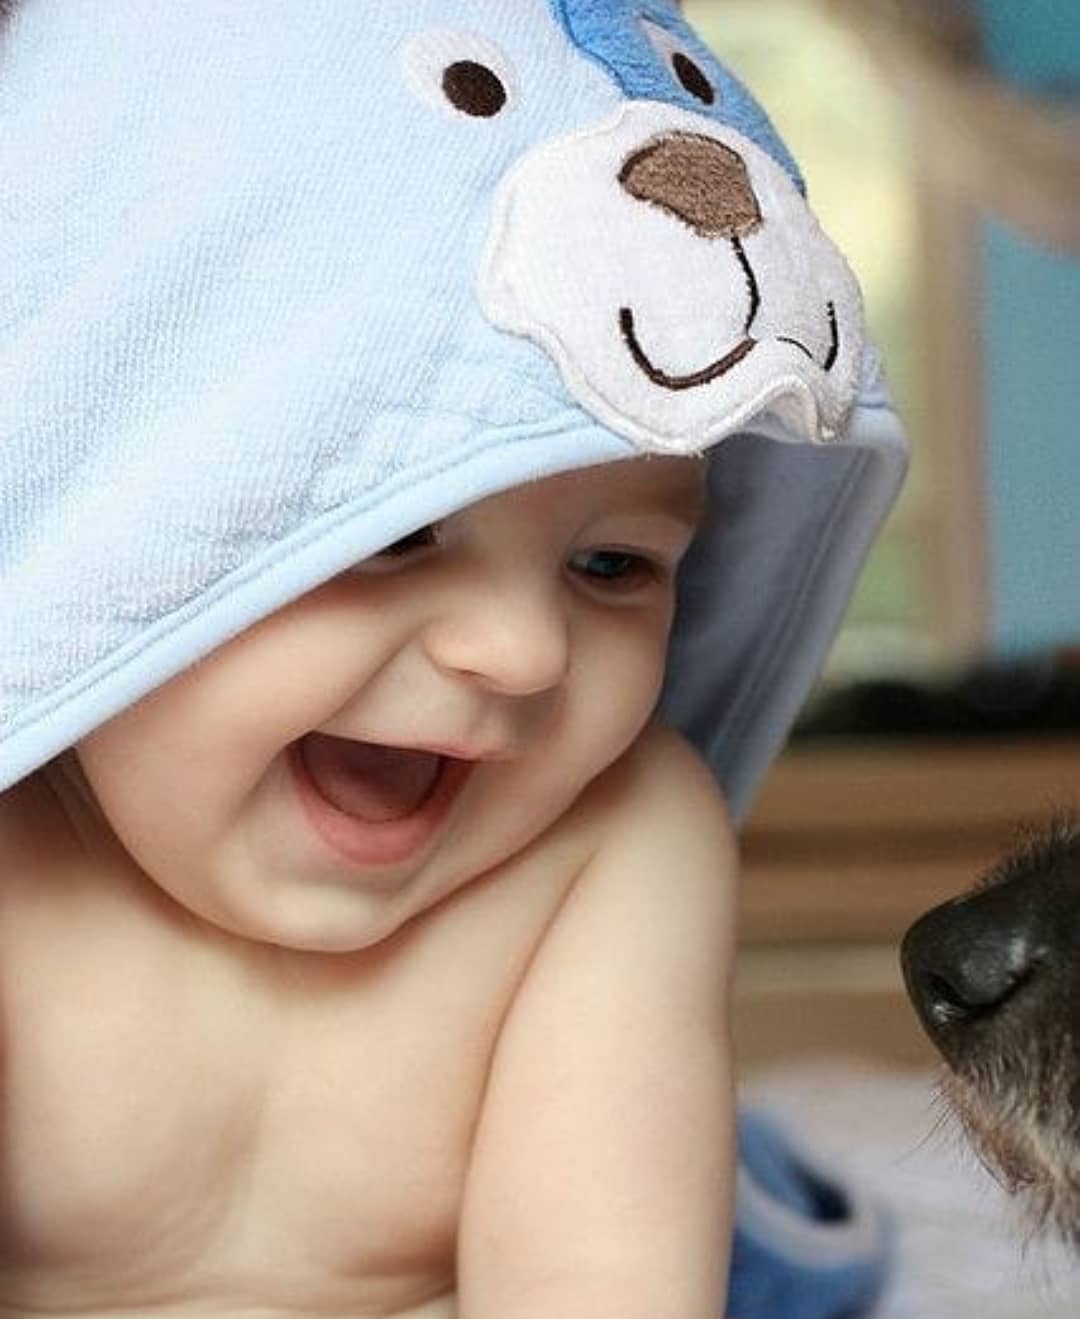 Smiling baby Instagram profile picture